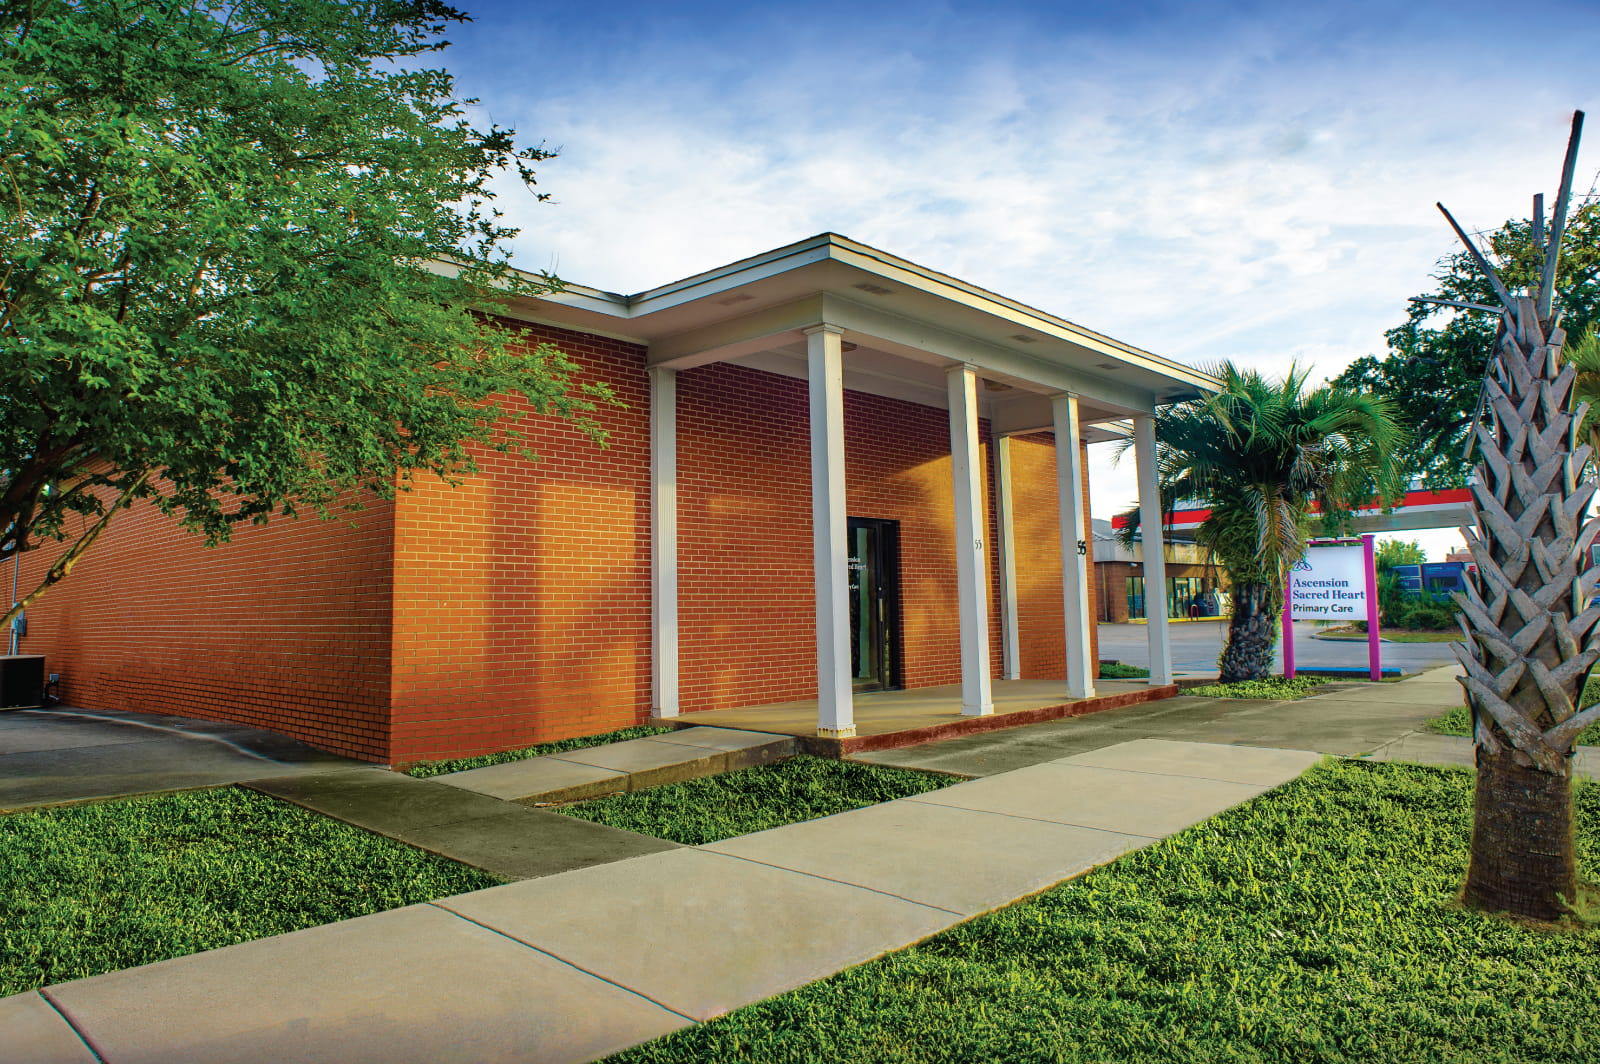 Ascension Medical Group Sacred Heart Primary Care - Apalachicola